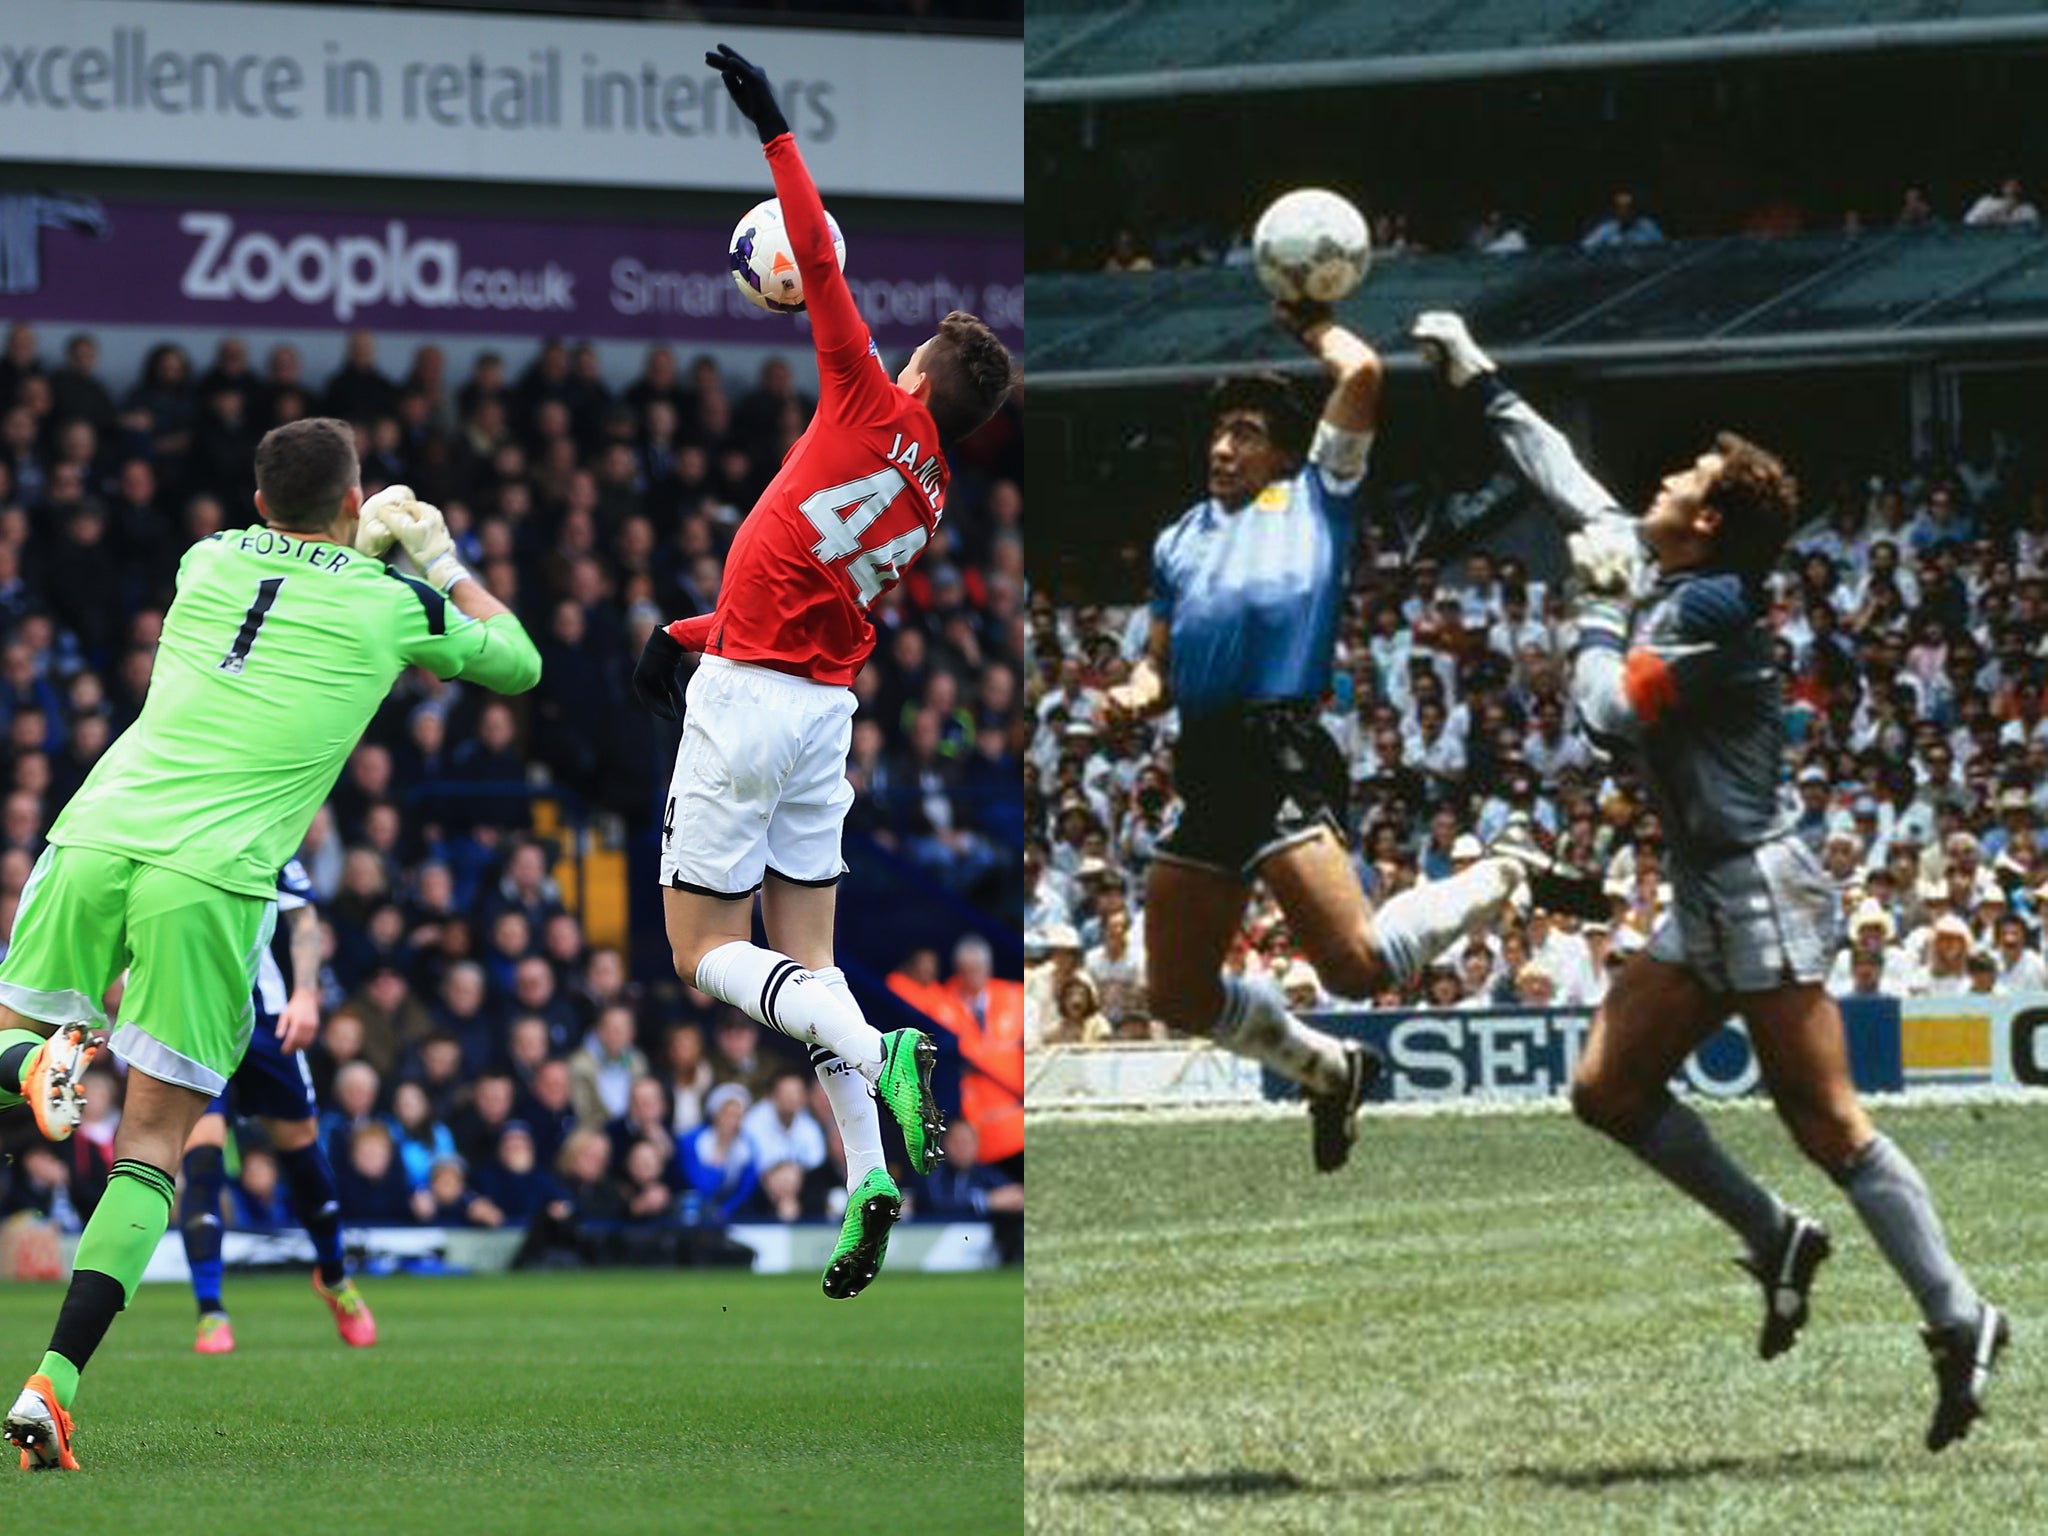 Adnan Januzaj was booked for his hand ball when trying to round West Brom goalkeeper Ben Foster, in a near-replica to Diego Maradona's 'Hand of God' against England in 1986